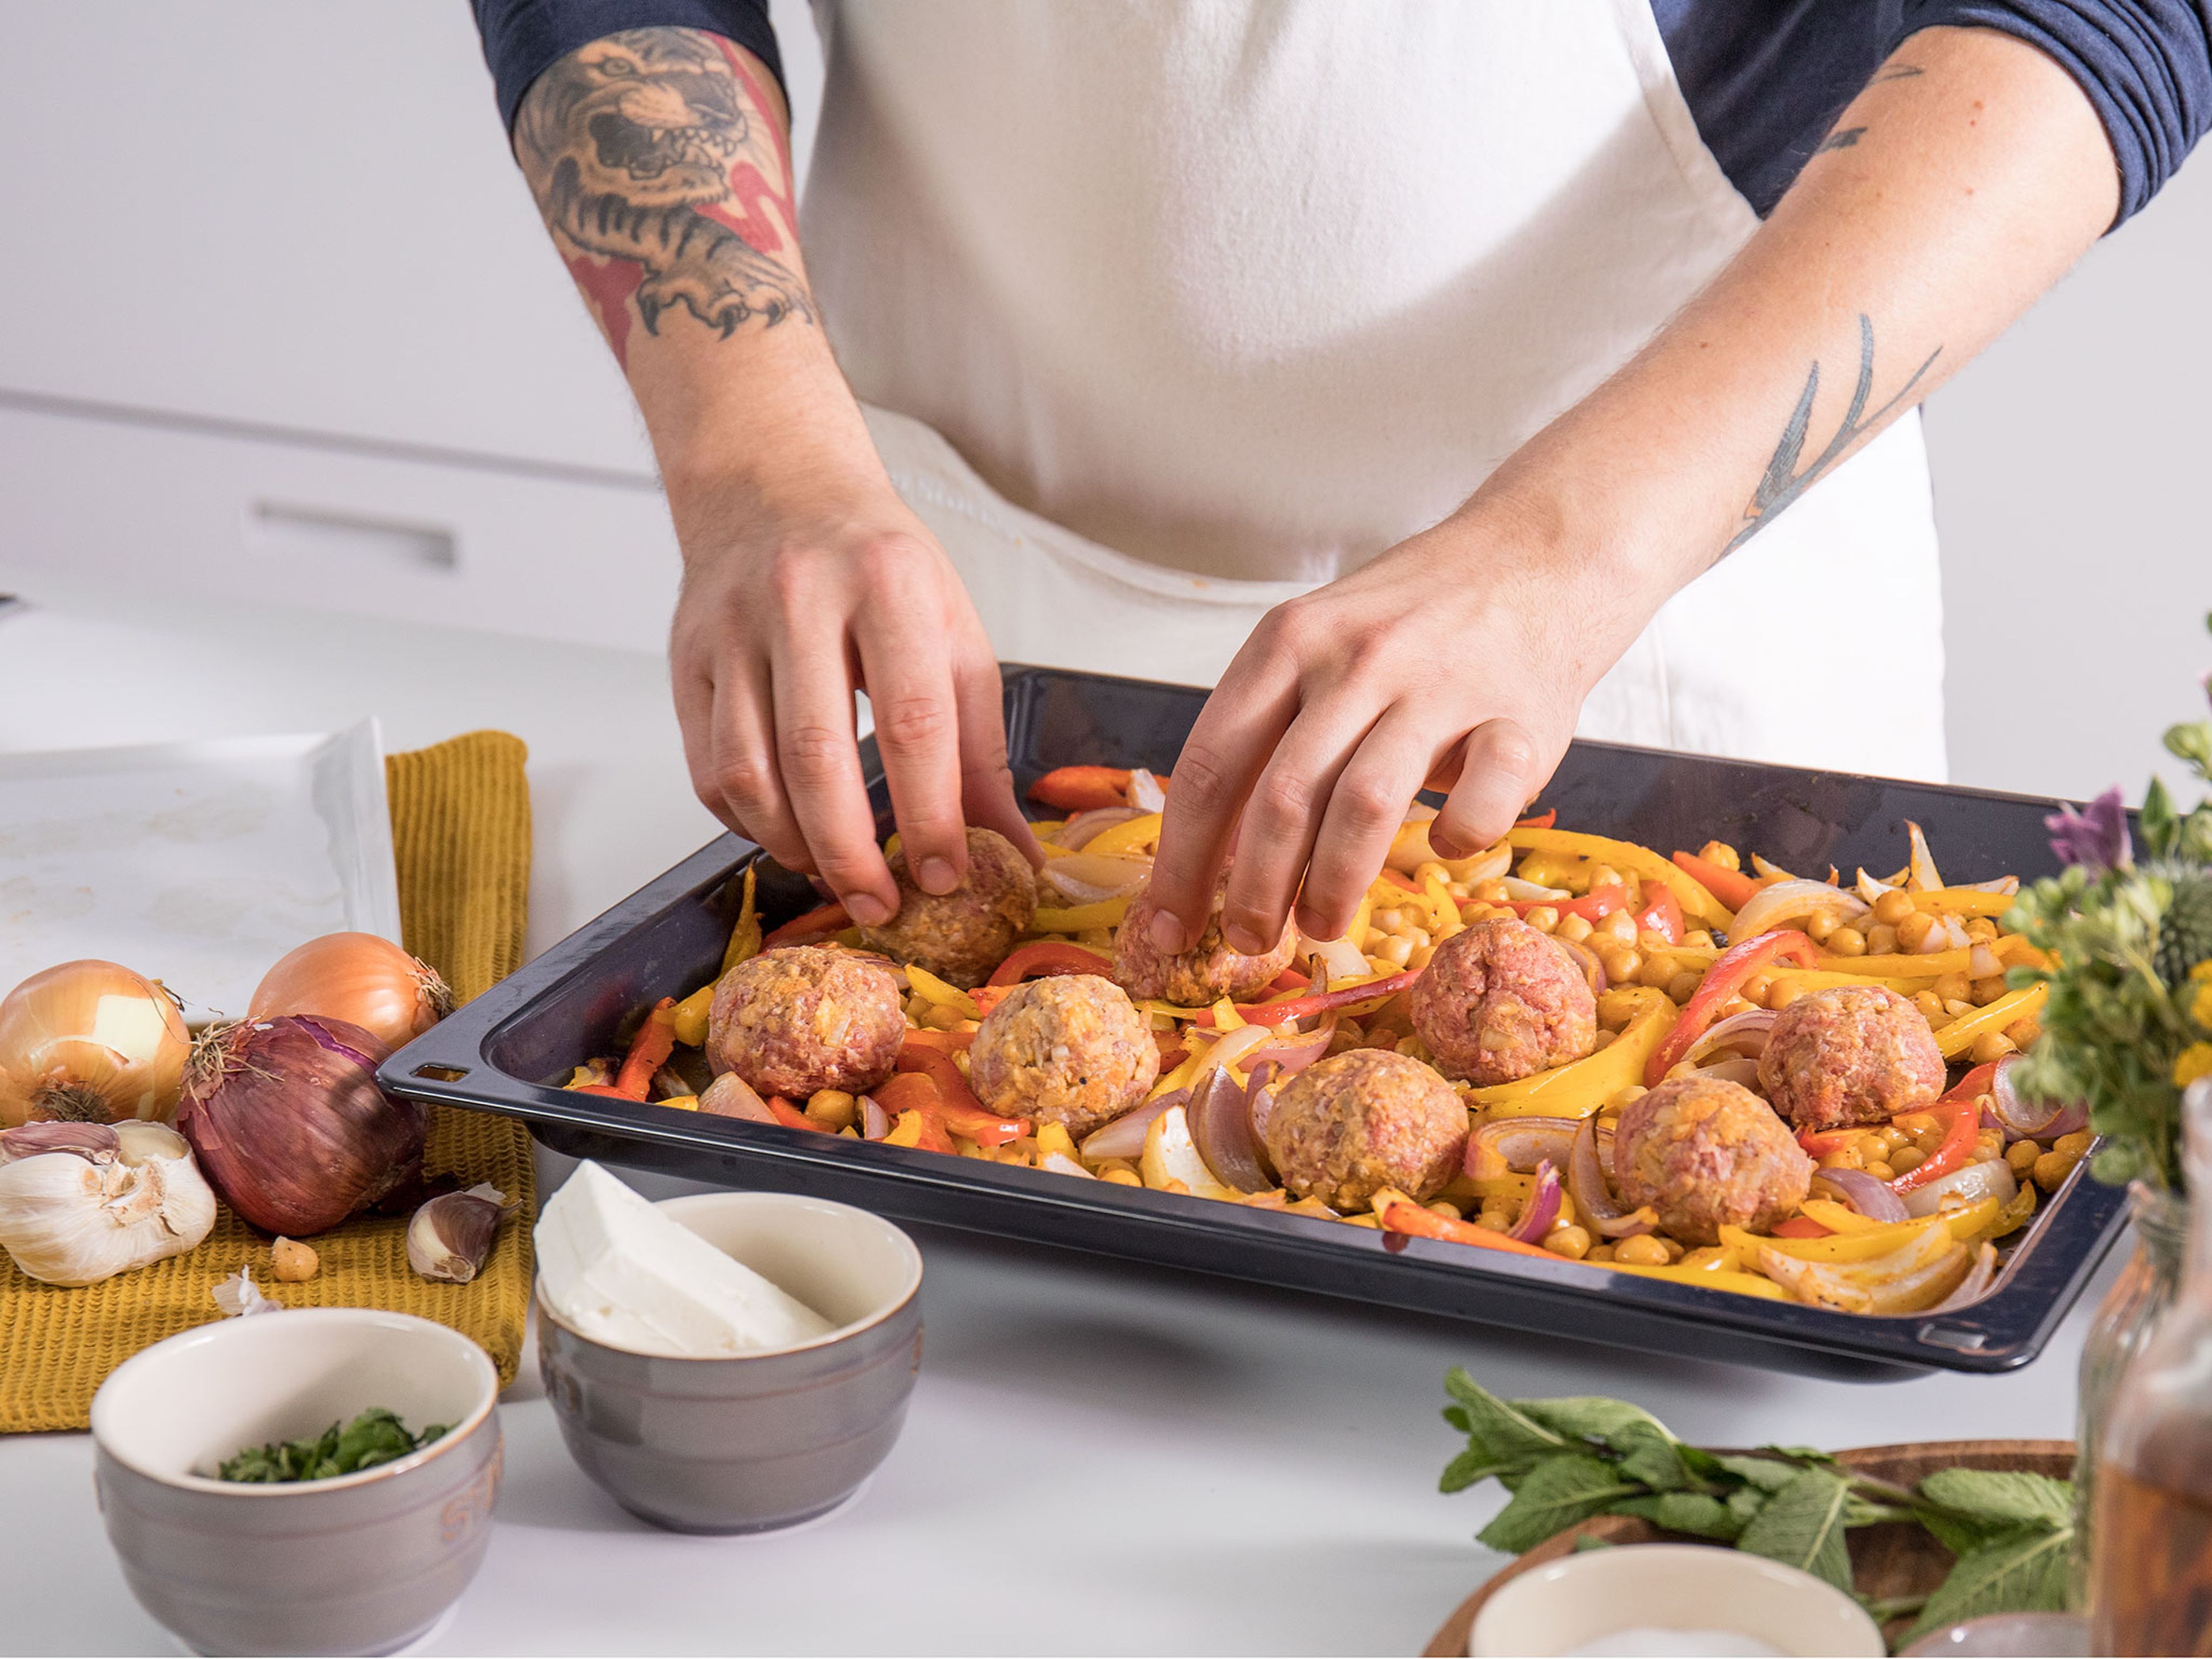 Spread the vegetables on a baking sheet and bake for approx. 10 min. After 10 min., scatter the meatballs on top of vegetables and bake for approx. 15 – 20 min. more.